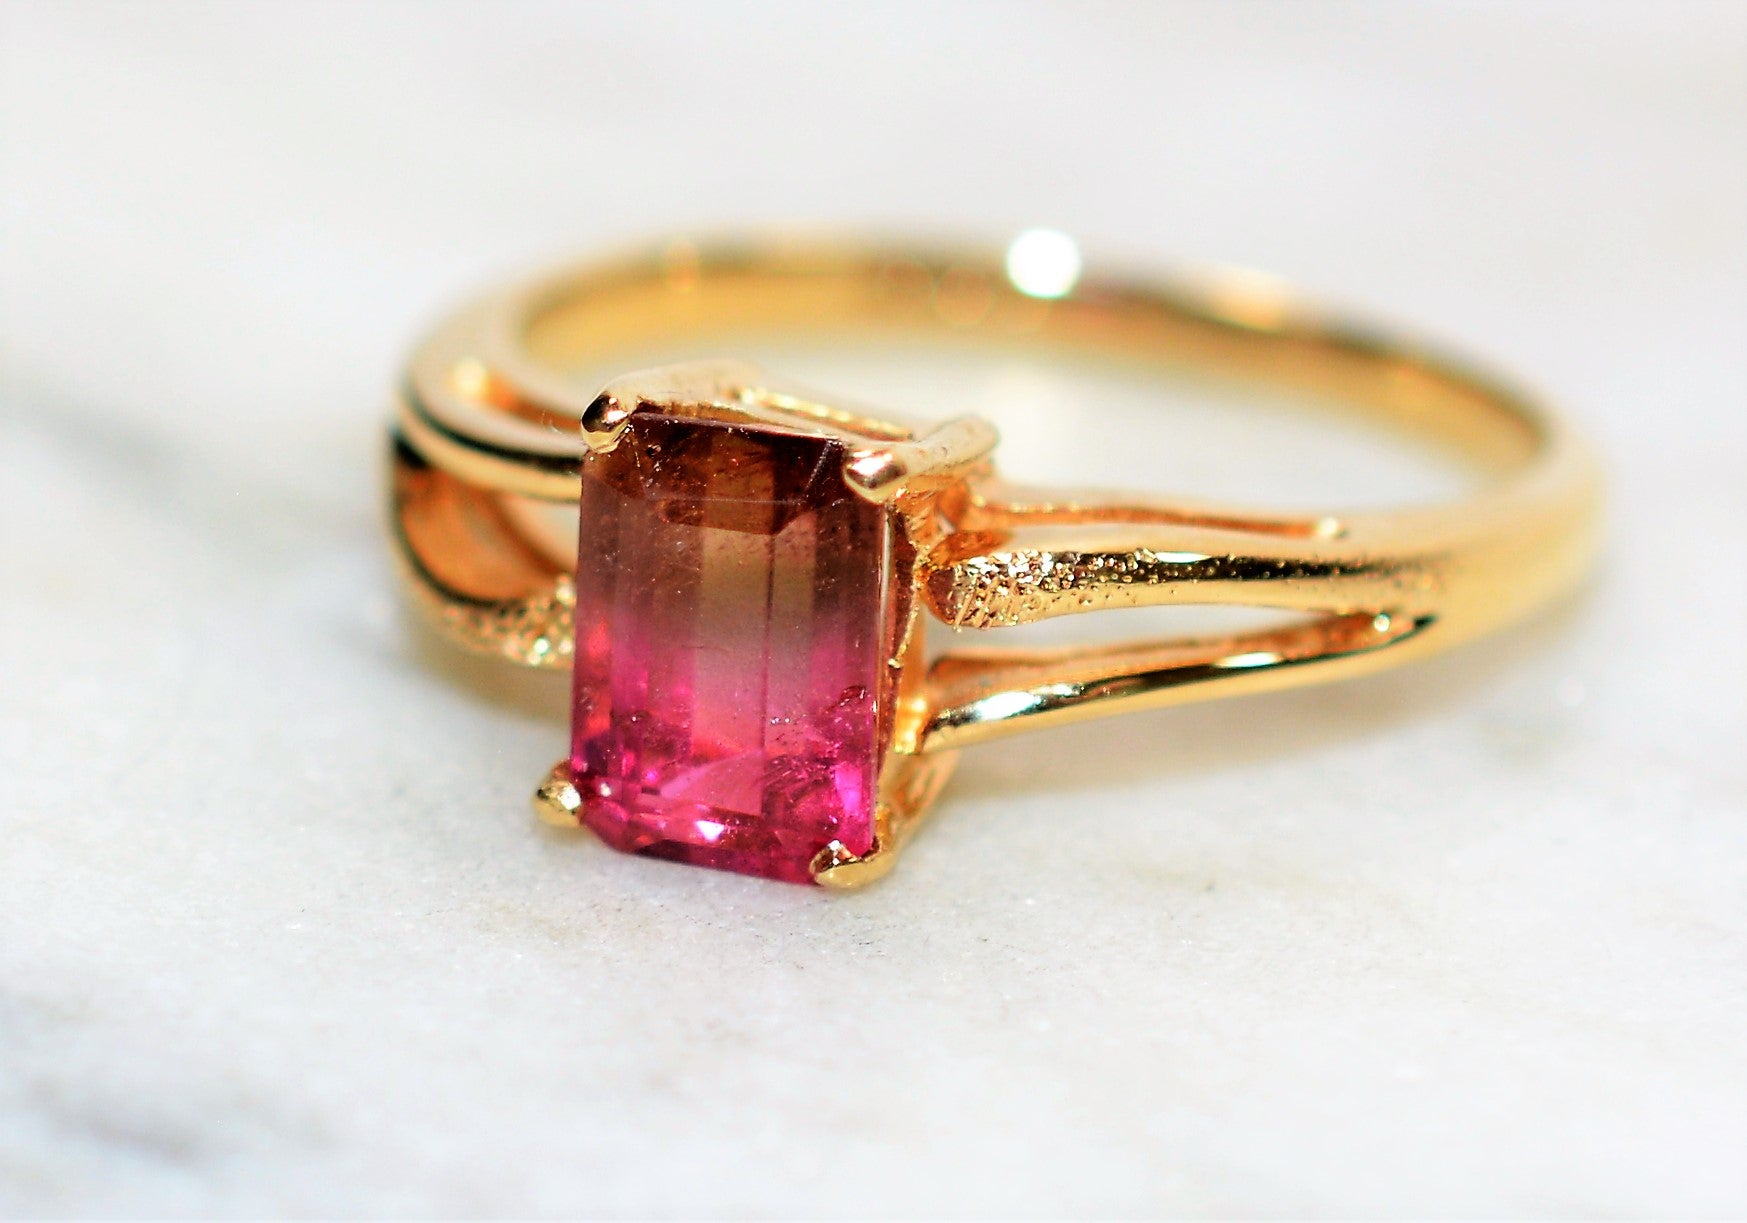 Natural Watermelon Tourmaline Ring 10K Solid Gold 1.09ct Gemstone Ring Solitaire Ring Ladies Ring Birthstone Ring Anniversary Ring Jewellery